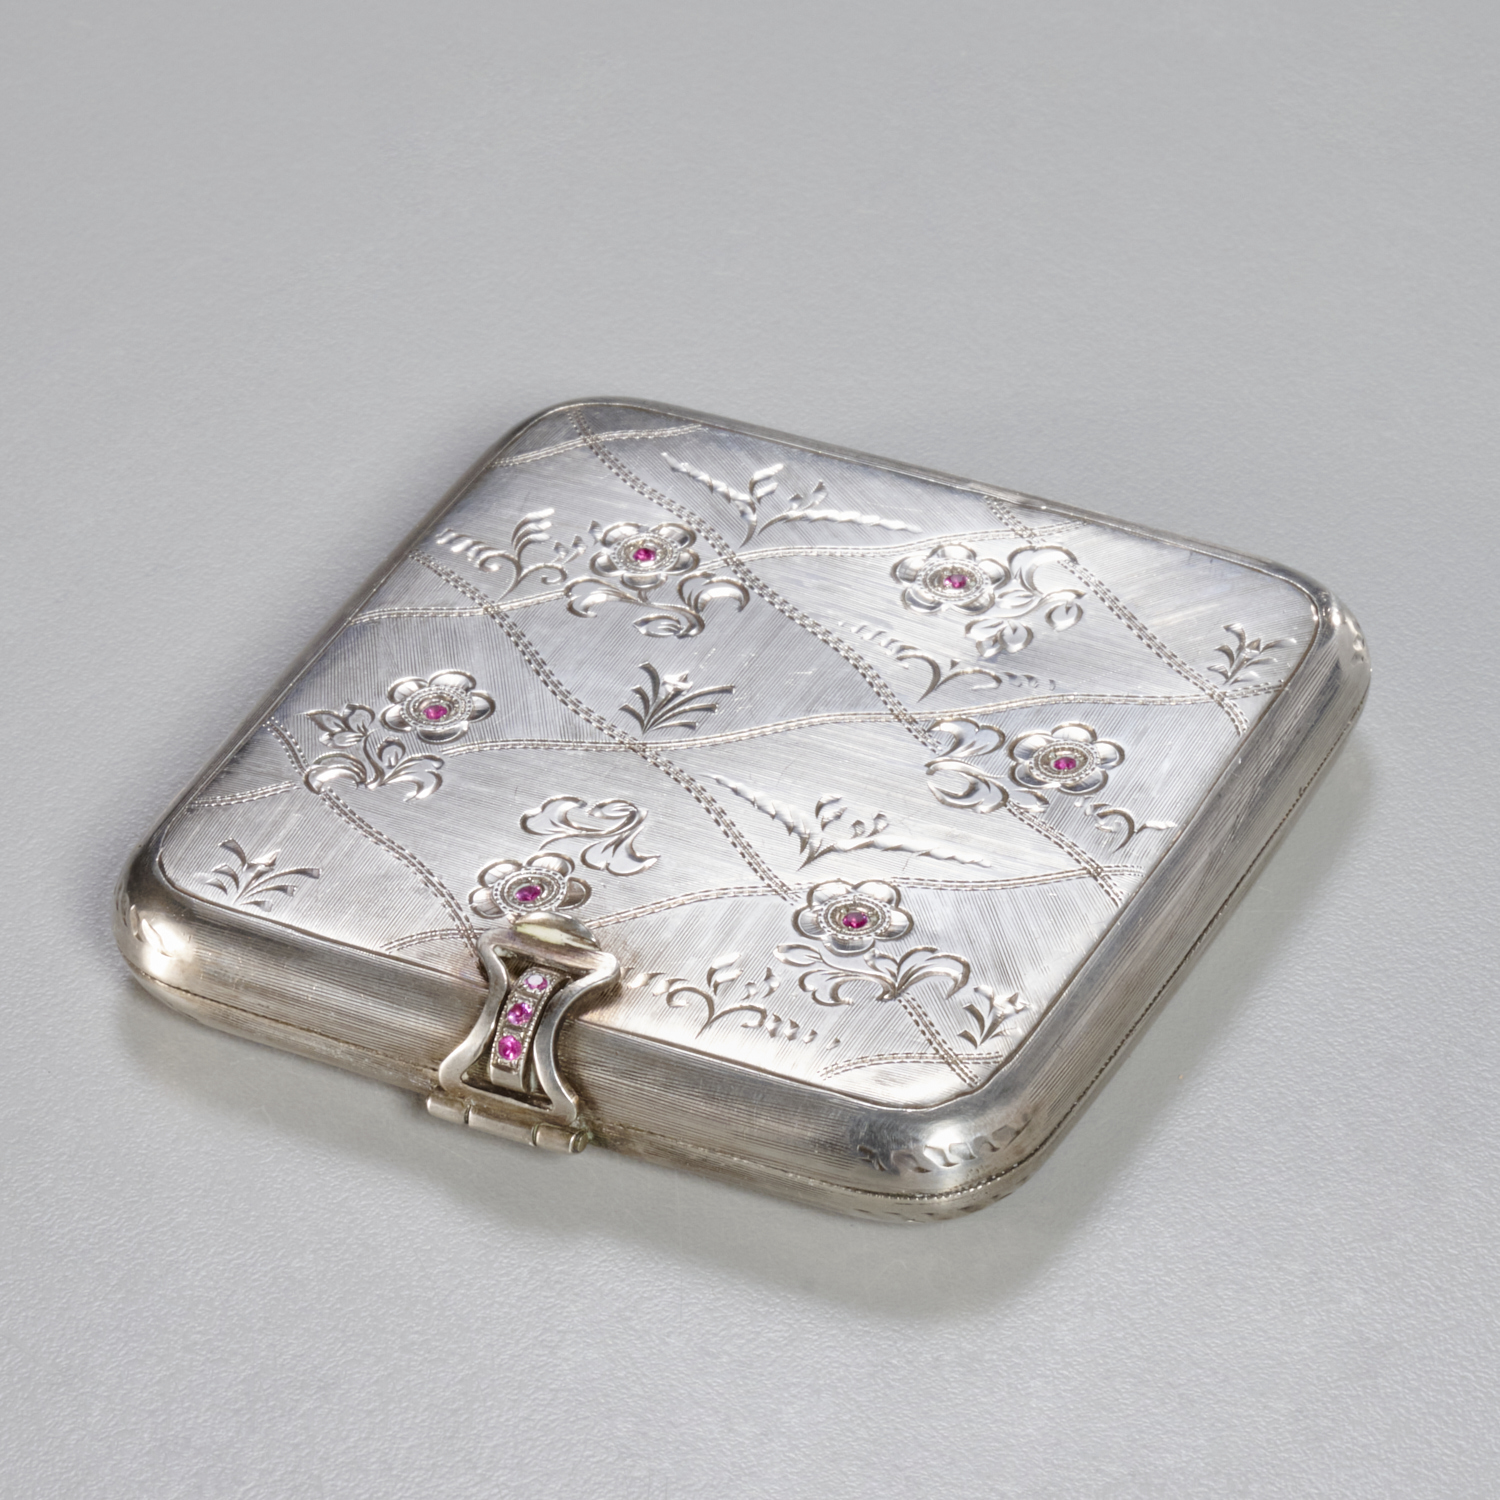 800 SILVER JEWELED COMPACT Early 2facf5